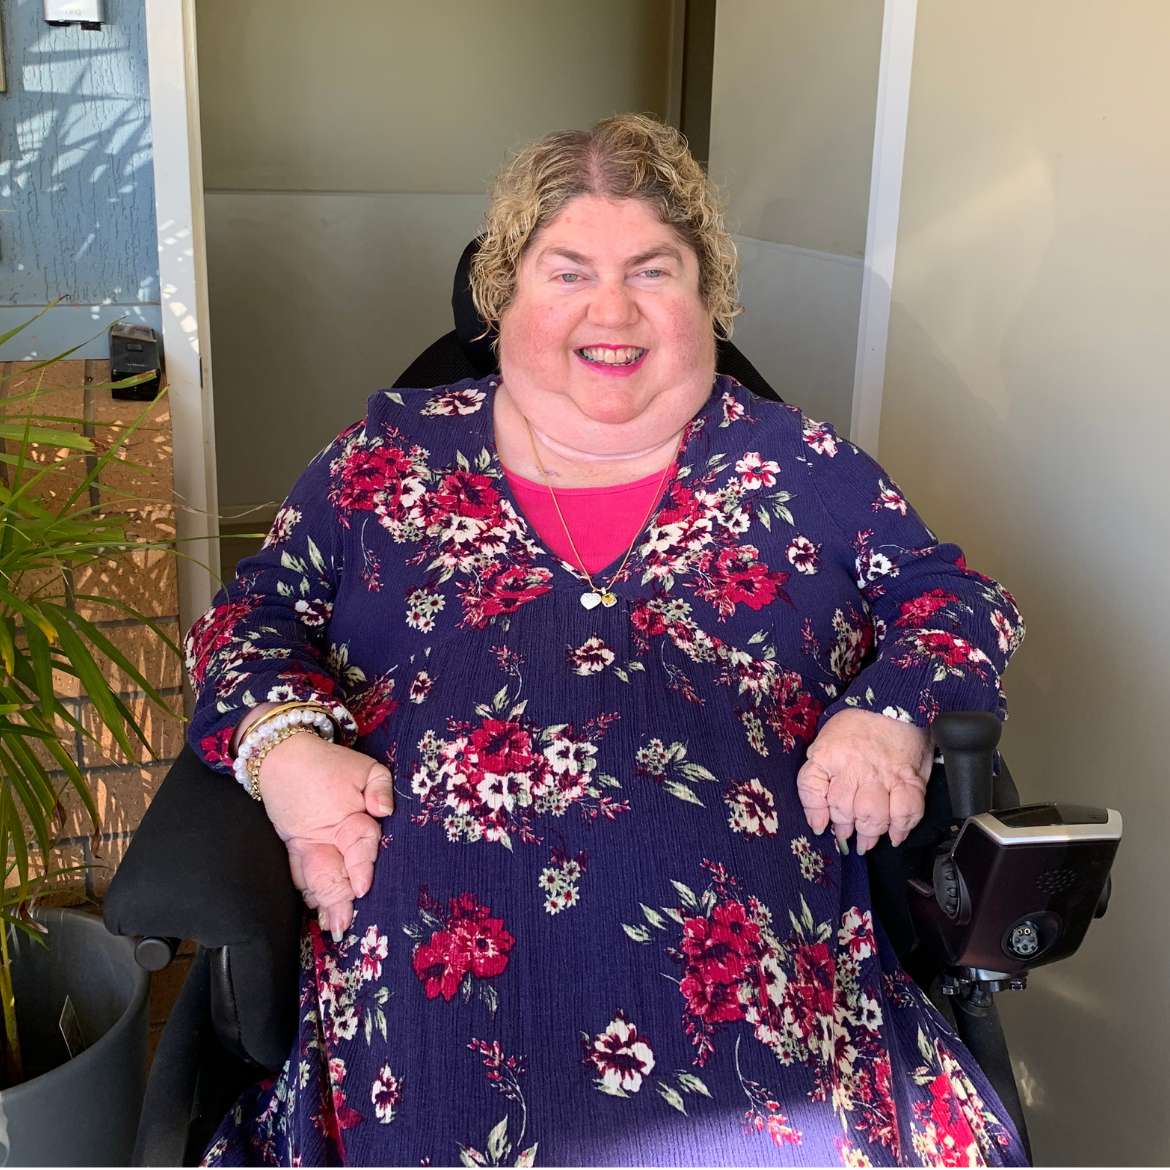 A lady in a blue dress with pink flowers in a wheel chair smiling at the camera.